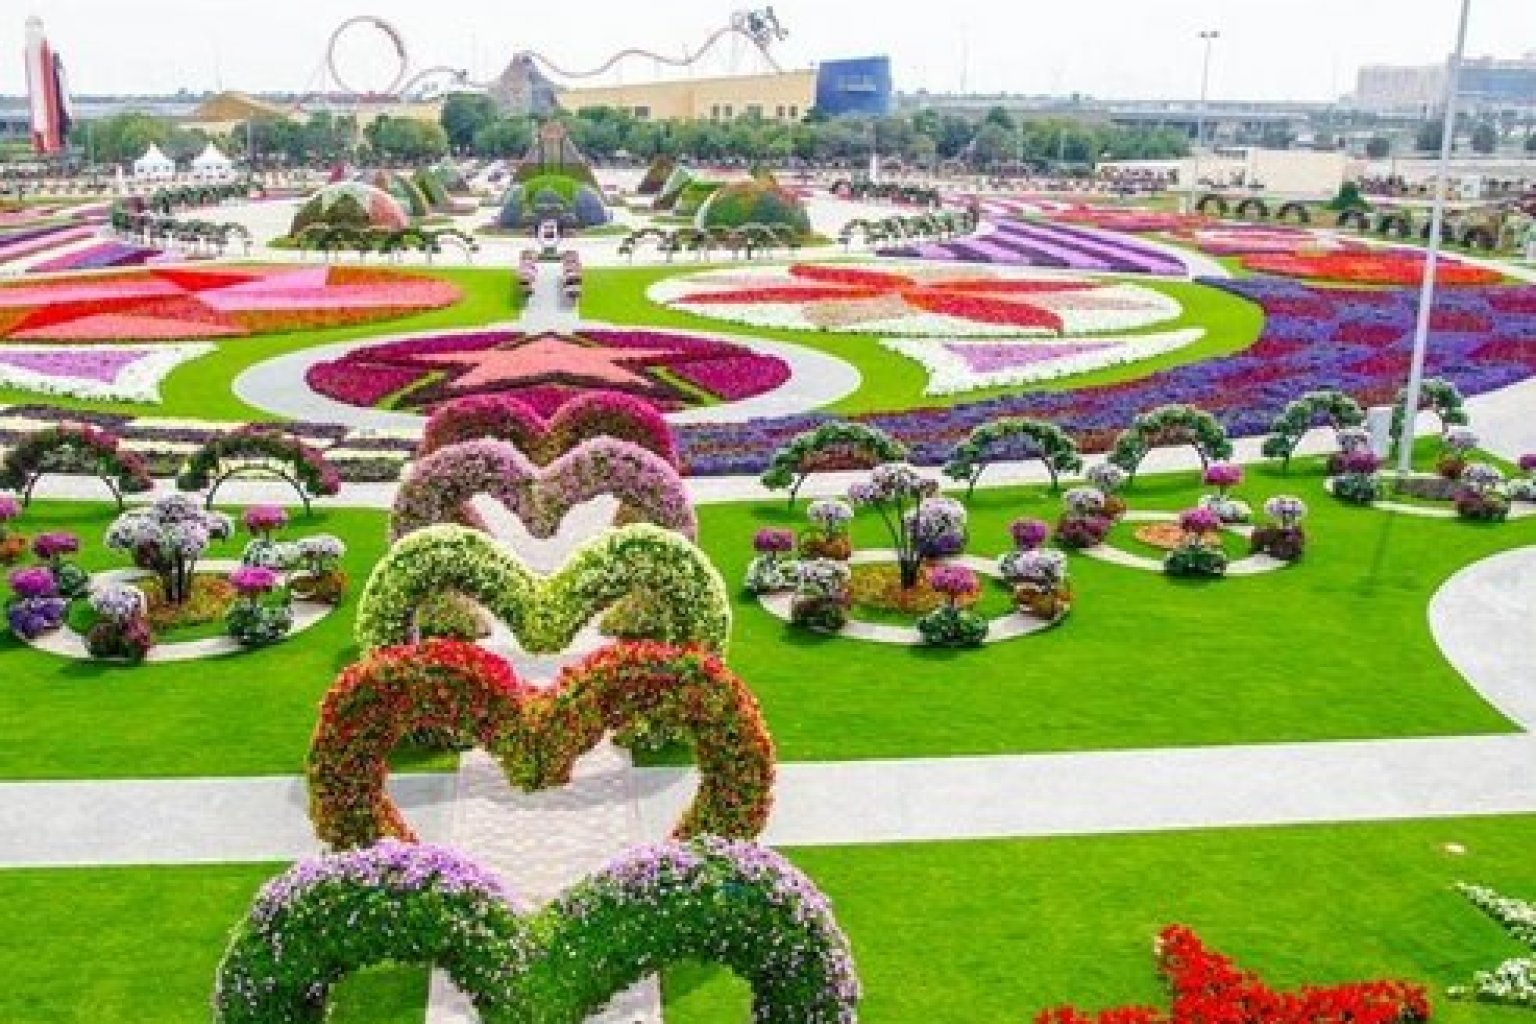 Dubai Miracle Garden Is One Of The Most Amazing Things We Ve Seen Photos Video